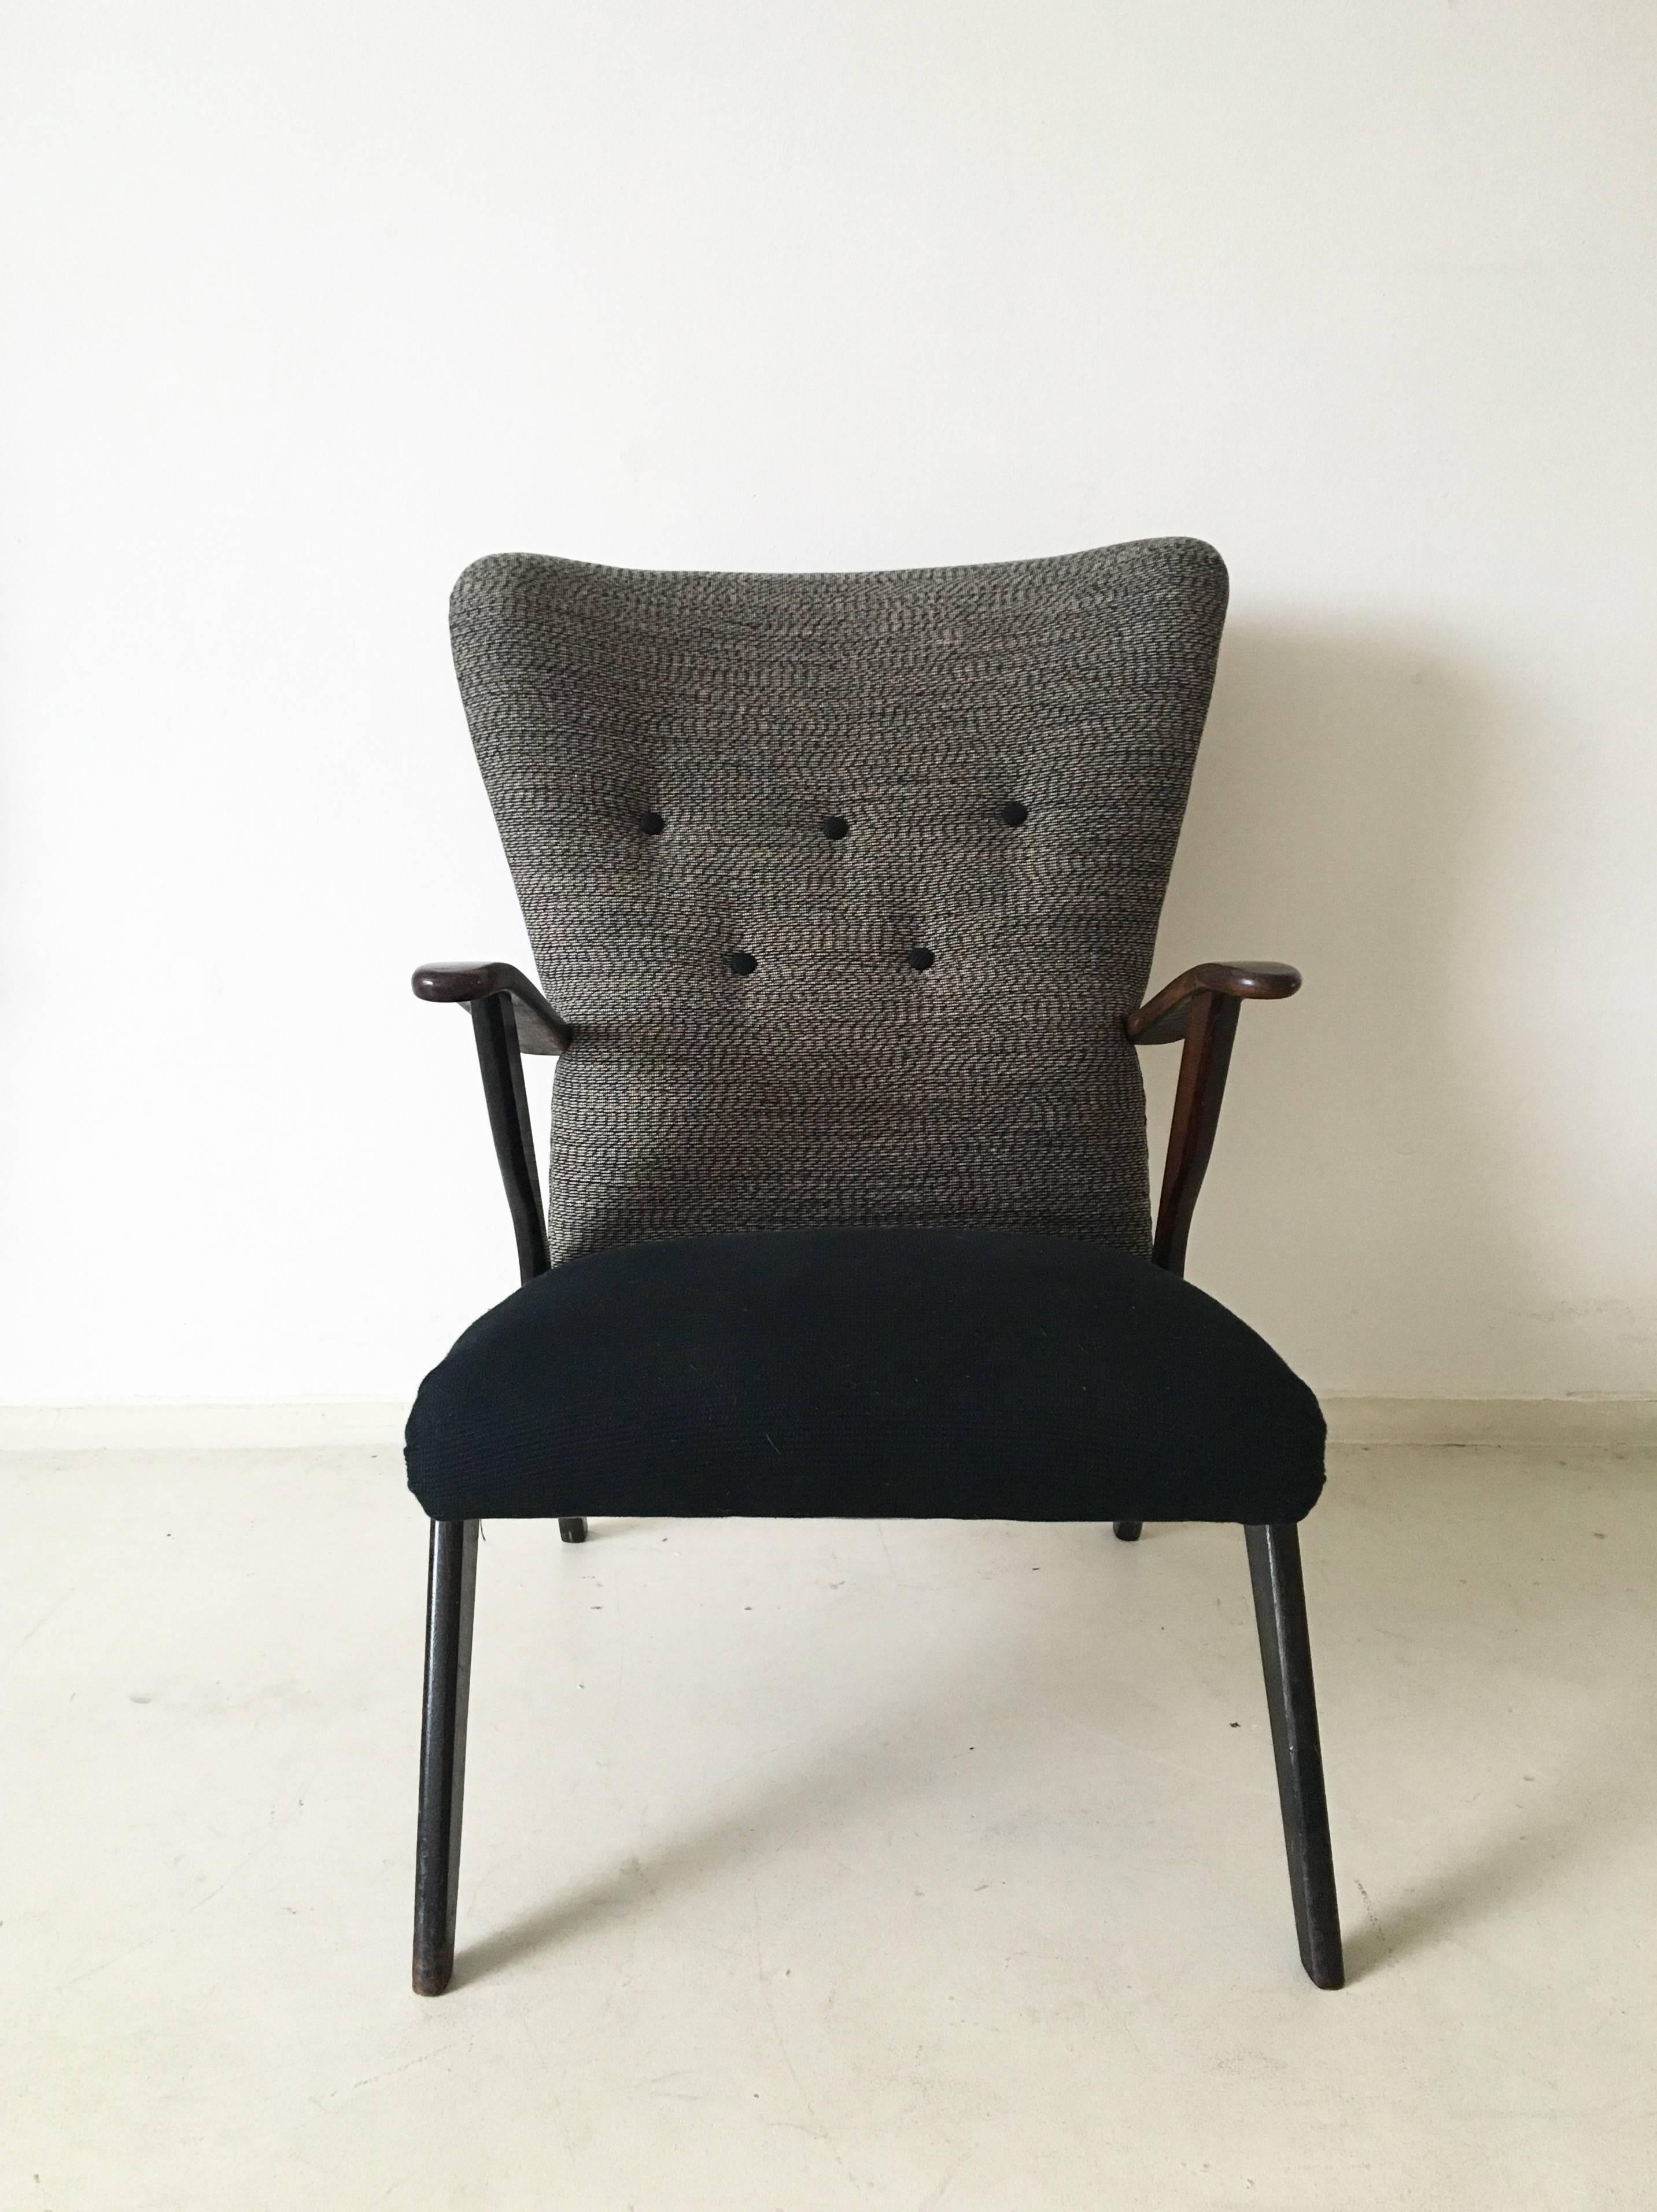 Wonderful re-upholstered wingback chair in style of Ercol. This easy or lounge chair belongs to the three-seat sofa we also have in stock. It is in good condition with some signs of age and use (very small scratches and cracks to it's frame).